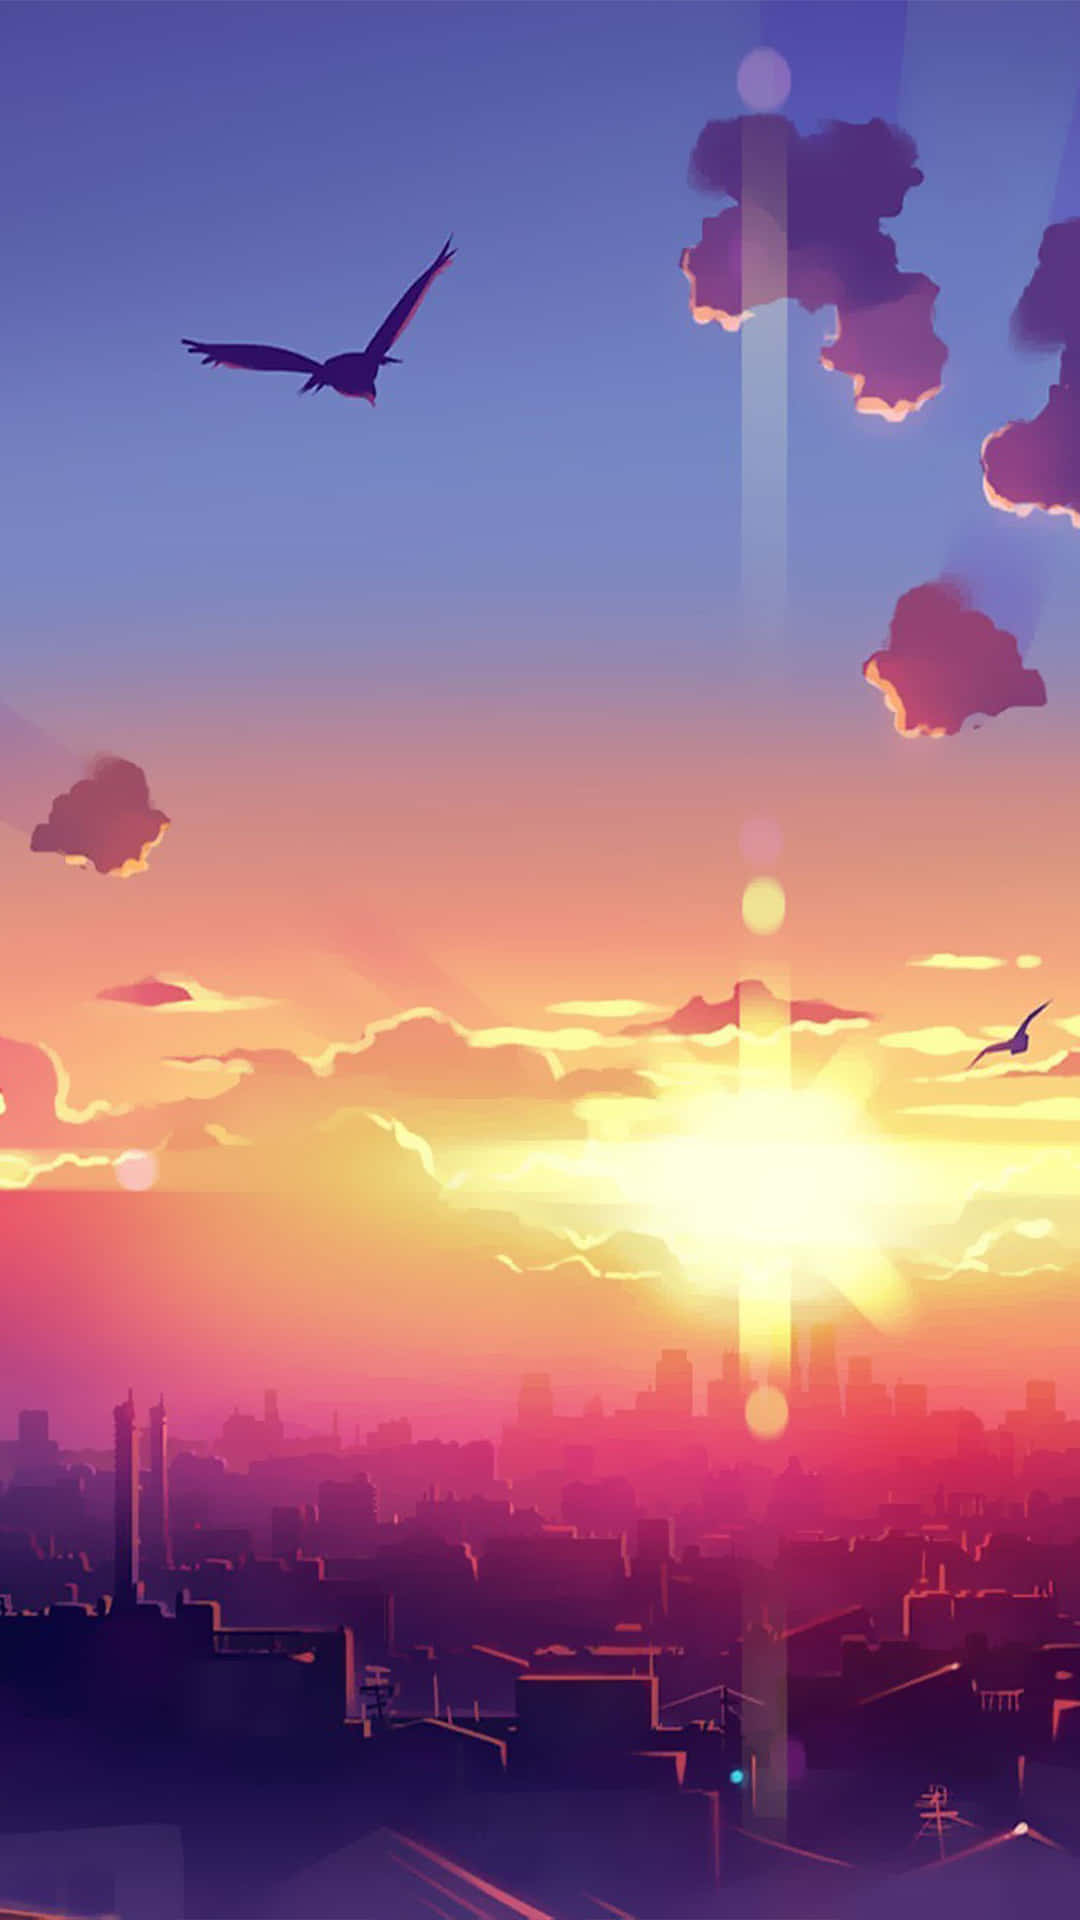 A City With A Sunset And Birds Flying Over It Wallpaper